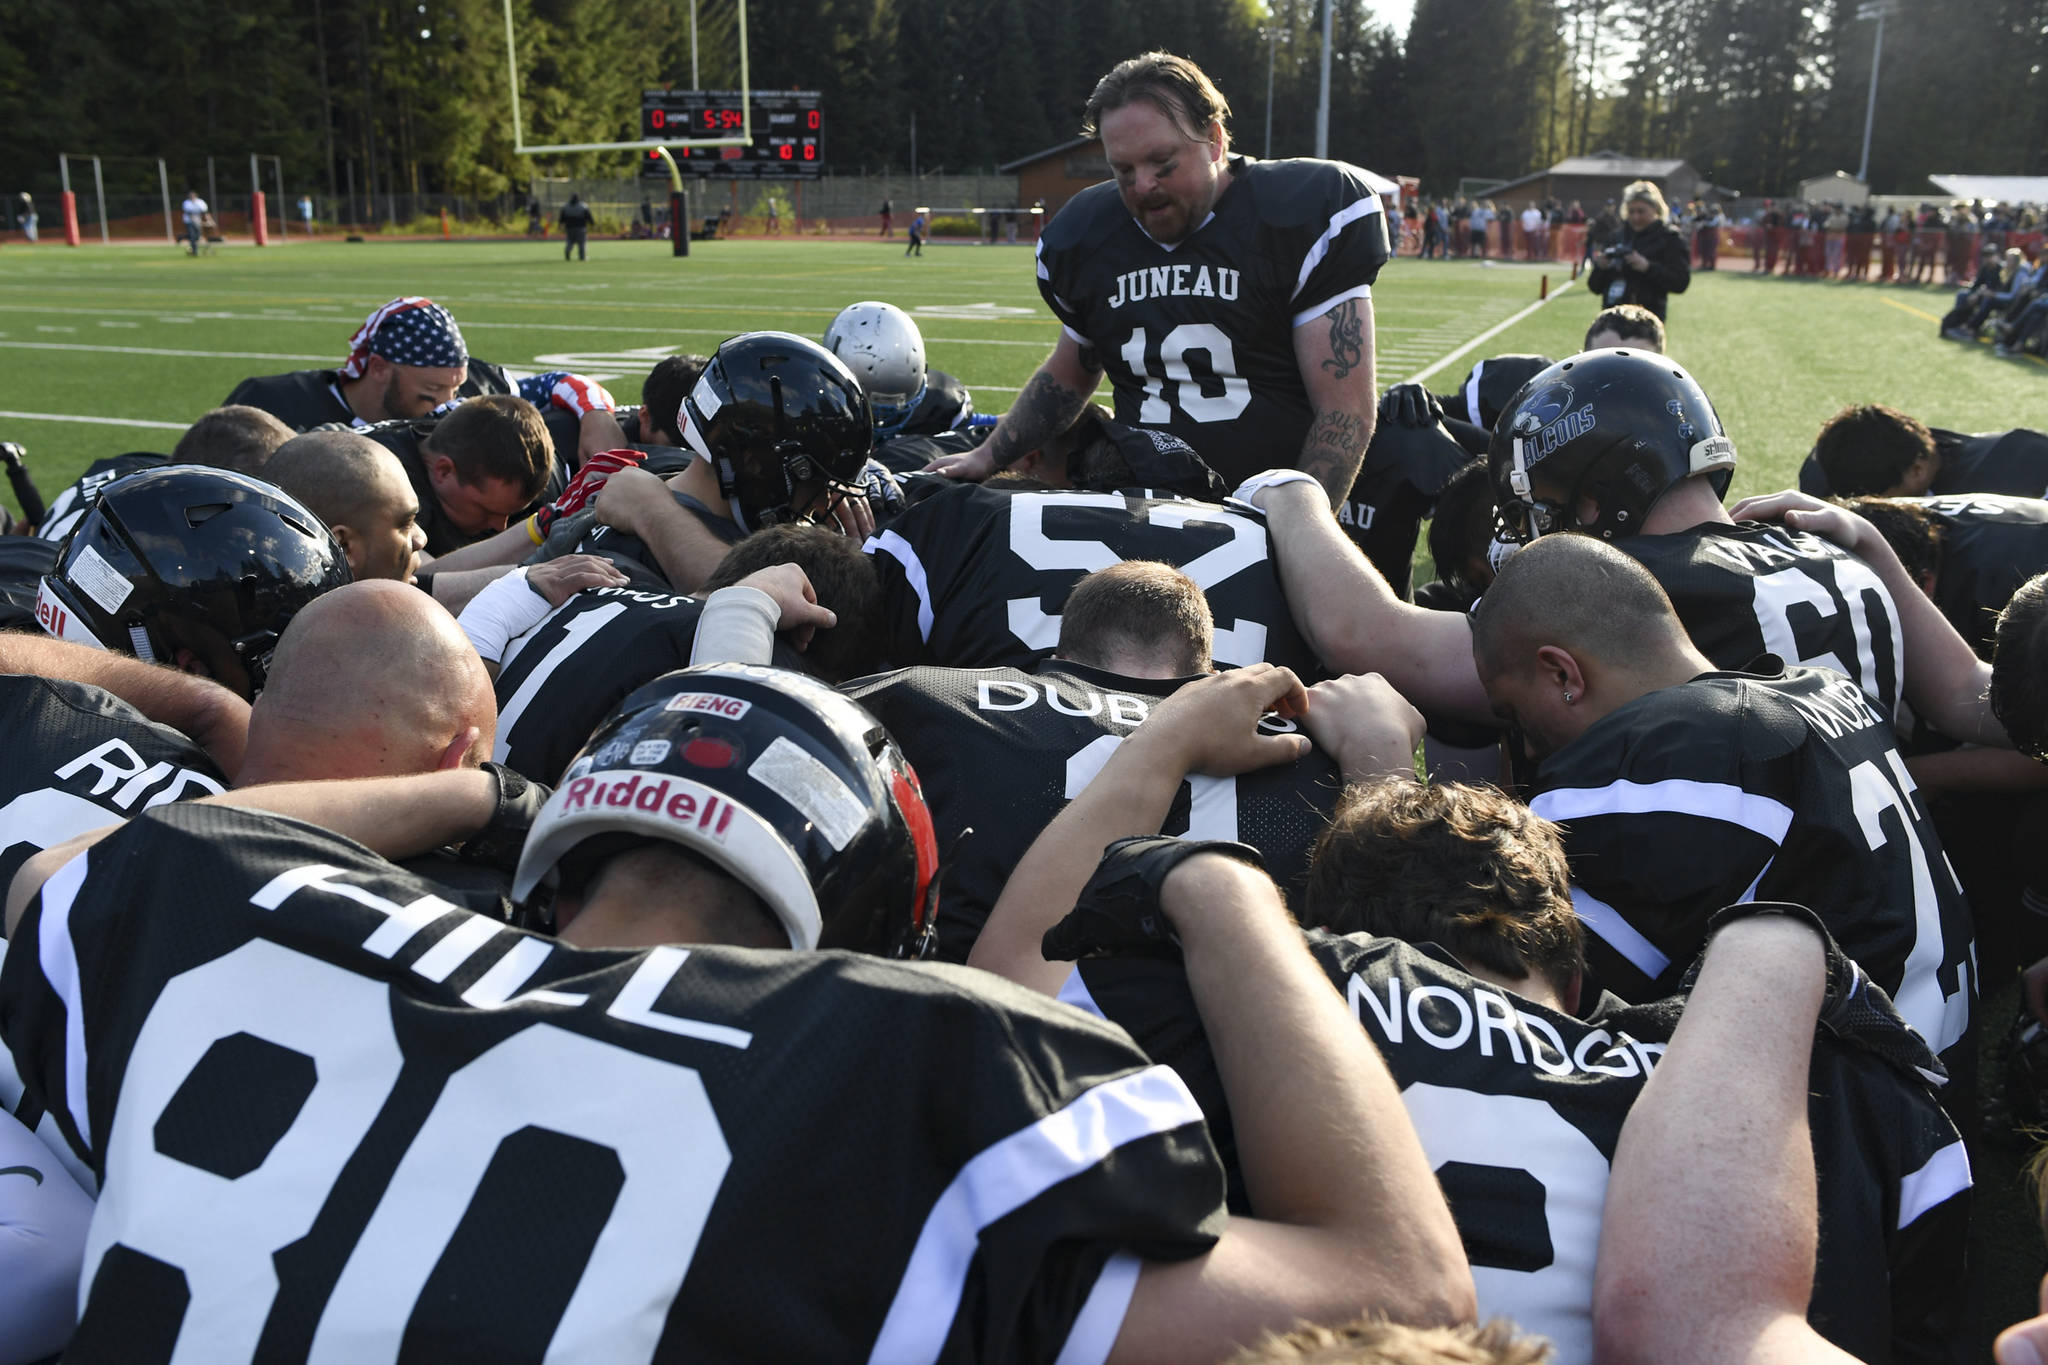 Chris Connally leads a prayer before the Juneau Alumni Football Game with football players, dance team members and cheerleaders from Juneau-Douglas and Thunder Mountain High Schools at Adair-Kennedy Memorial Field on Friday, May 24, 2019. (Michael Penn | Juneau Empire)